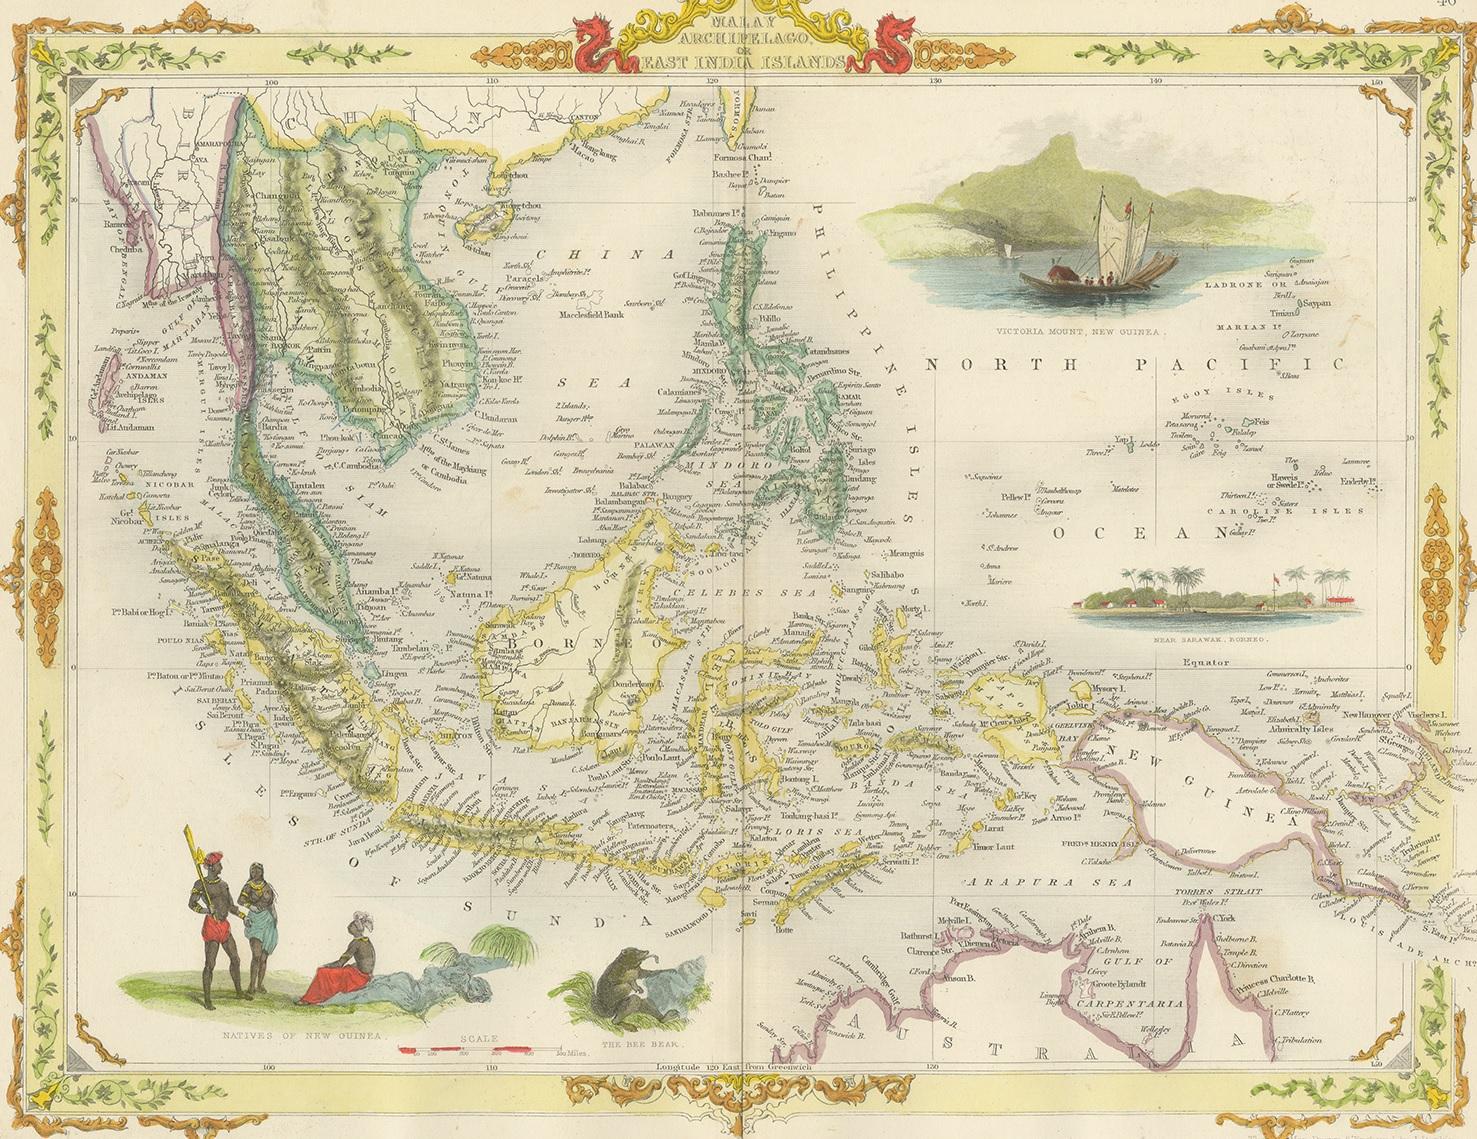 Antique map titled 'Malay Archipelago, or East India Islands'. With vignettes of Victoria Mount, New Guinea, Nativaes of New Guinea and scenes near Sarawak, Borneo. Originates from 'The Illustrated Atlas, And Modern History Of The World